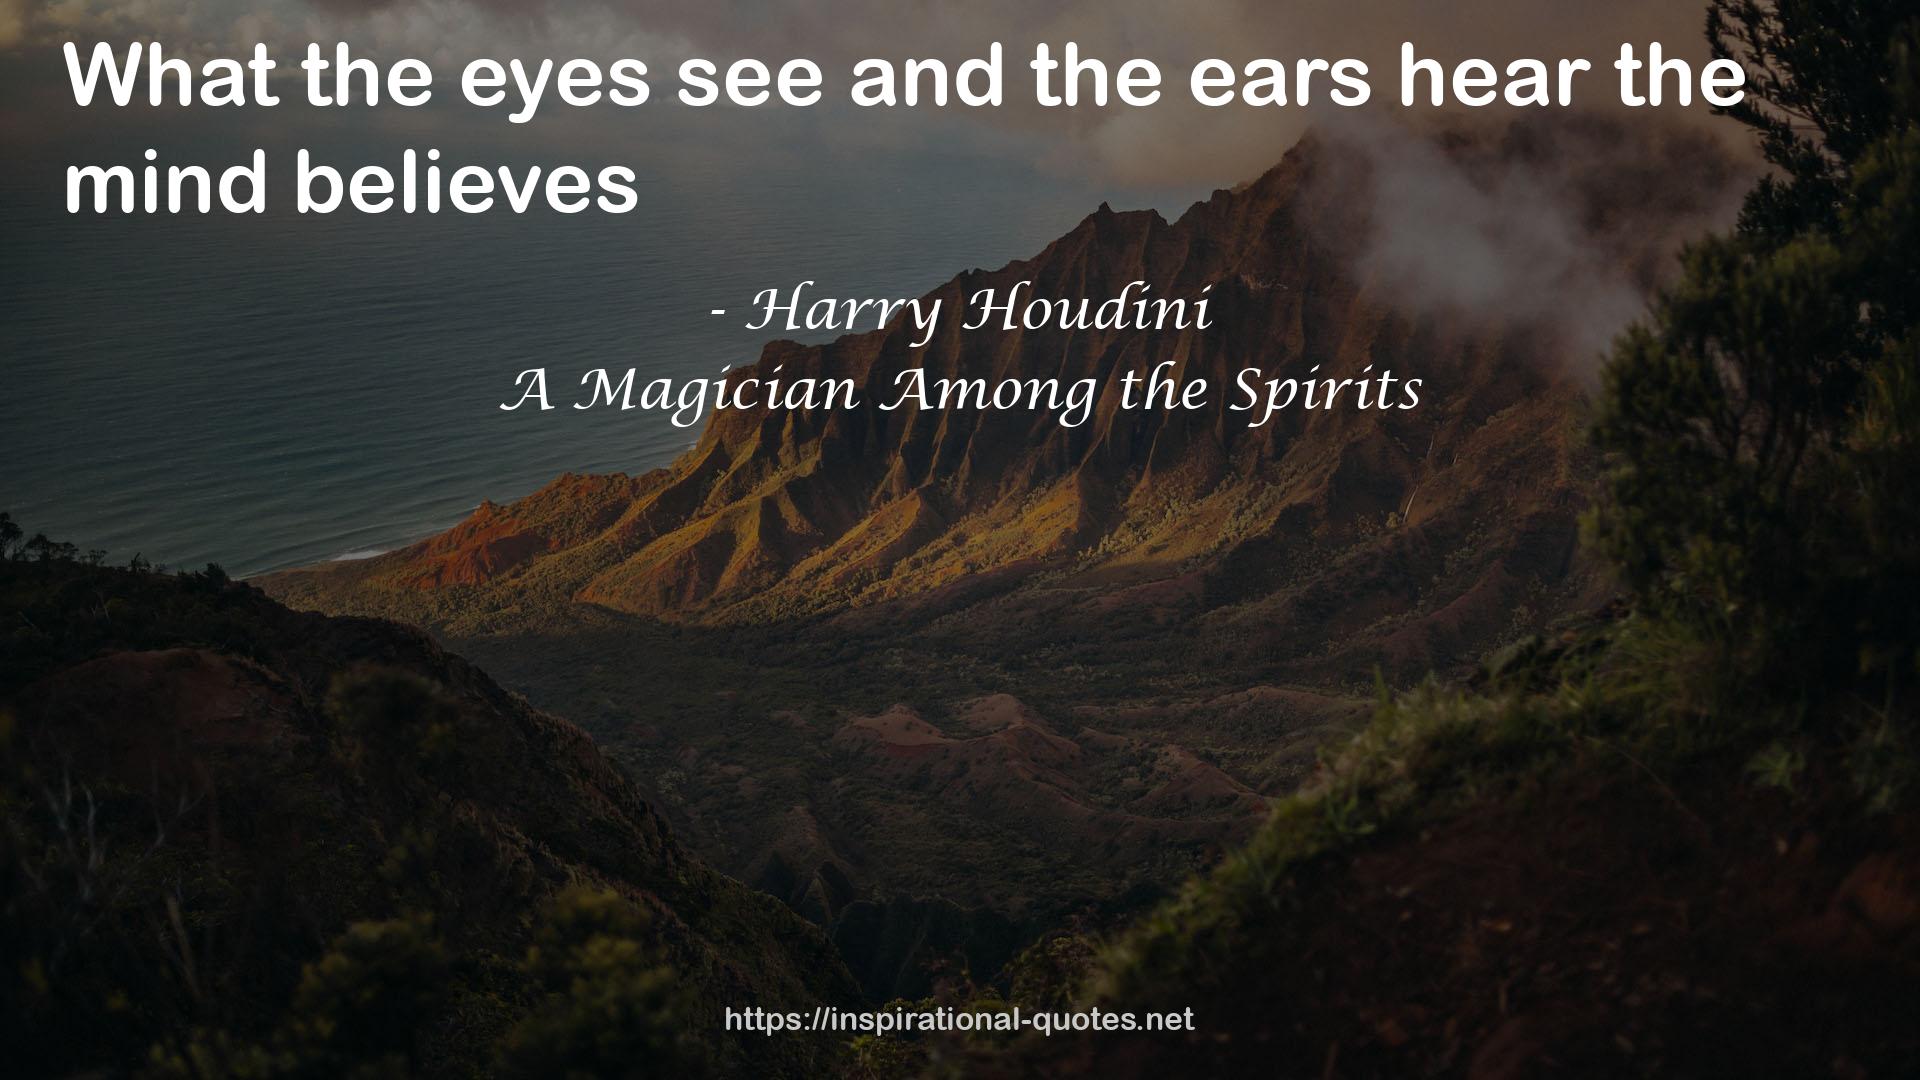 A Magician Among the Spirits QUOTES